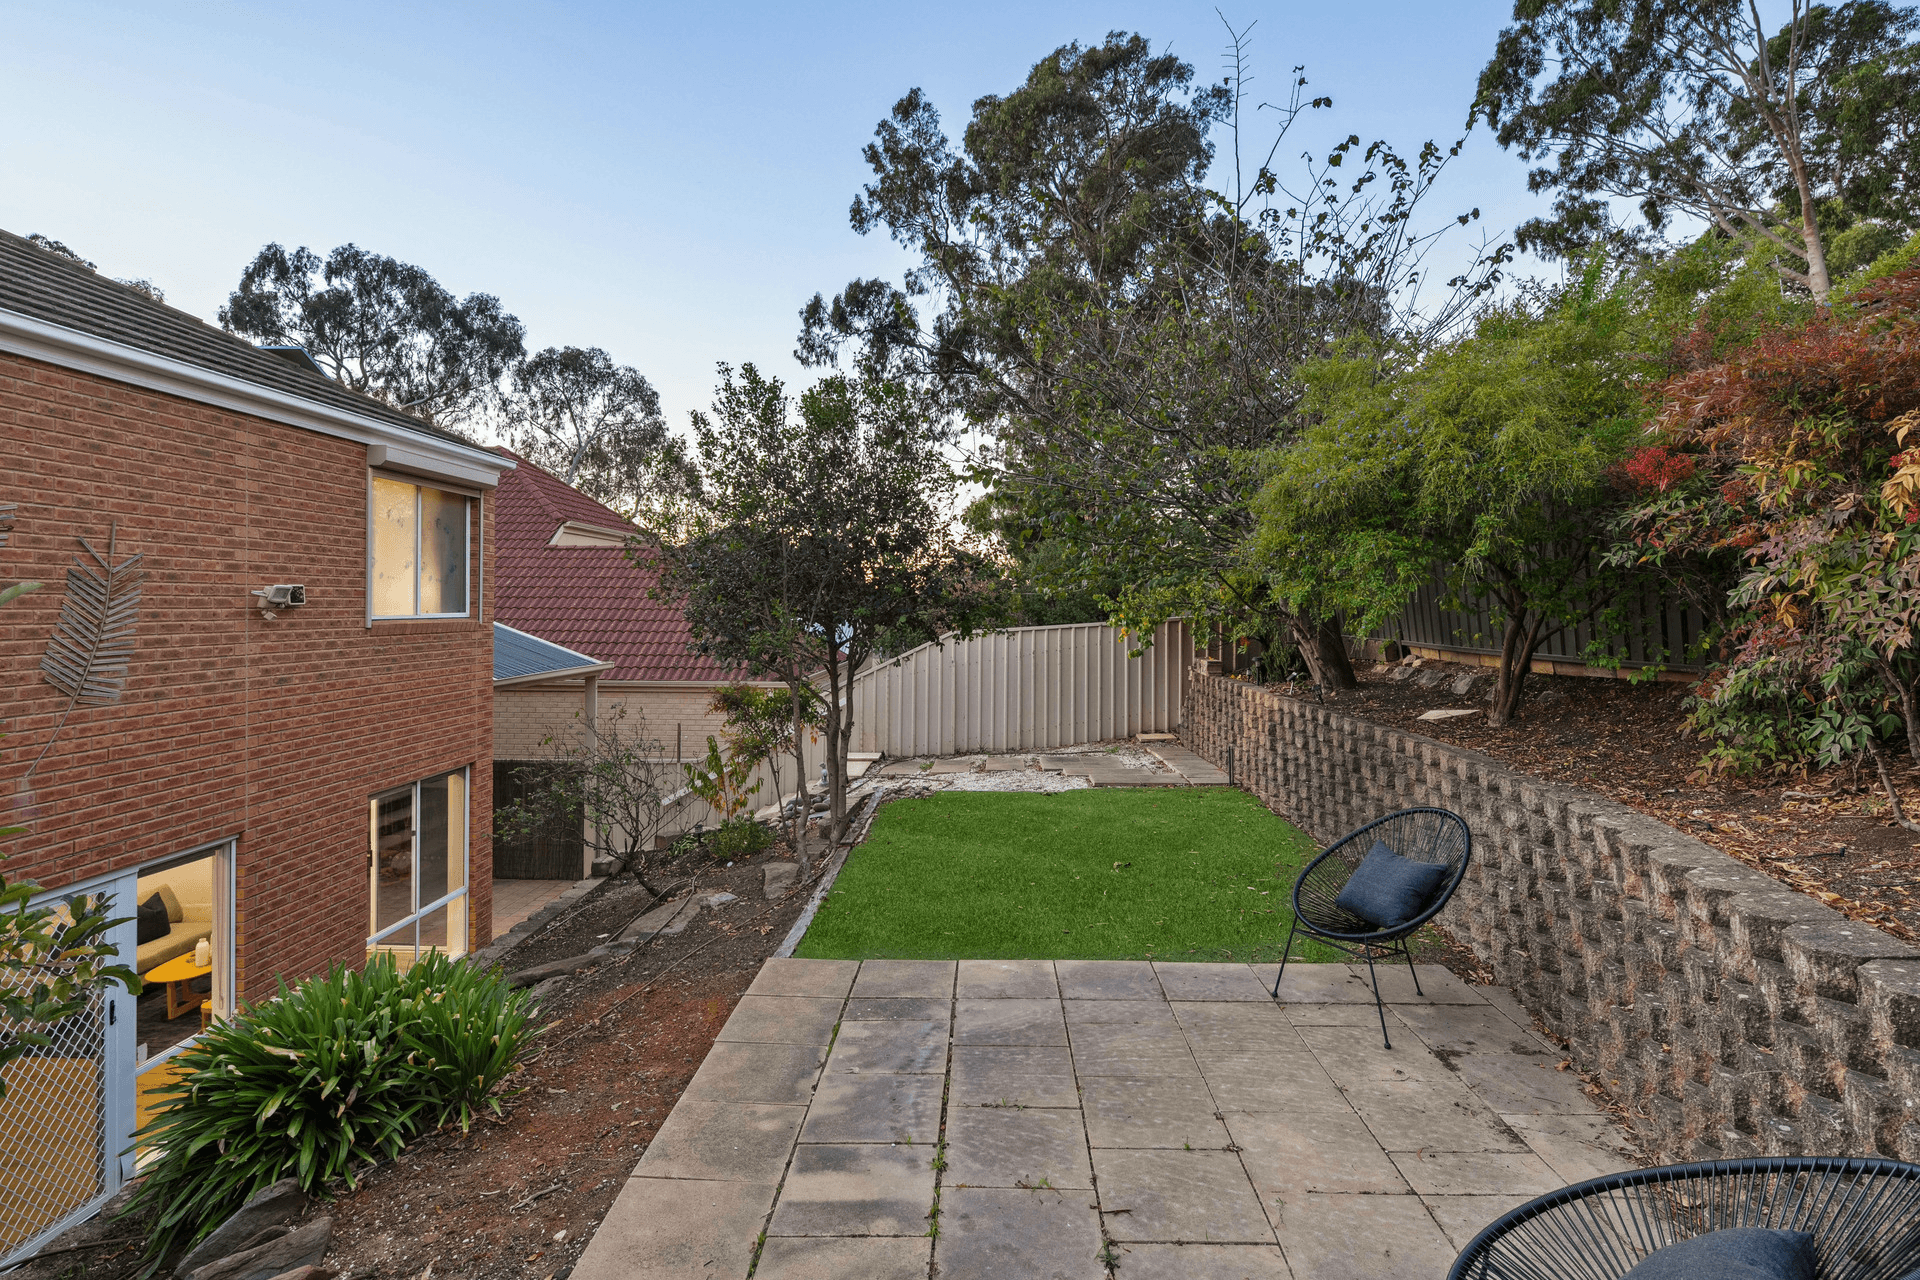 22A Gothic Avenue, Stonyfell, SA 5066